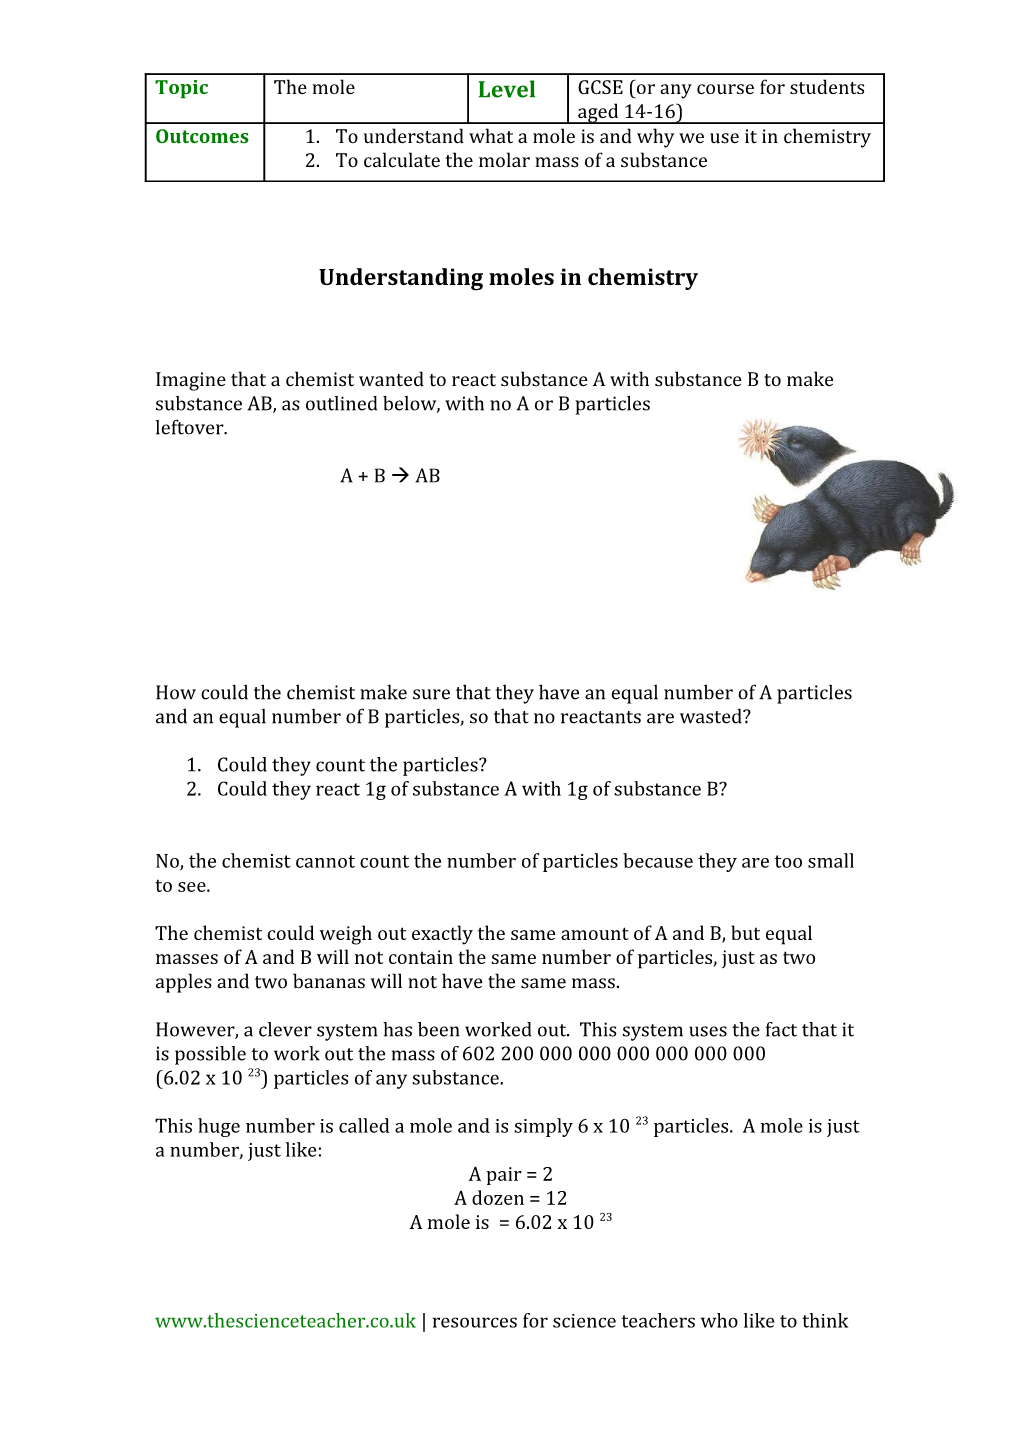 To Understand What a Mole Is and Why We Use It in Chemistry